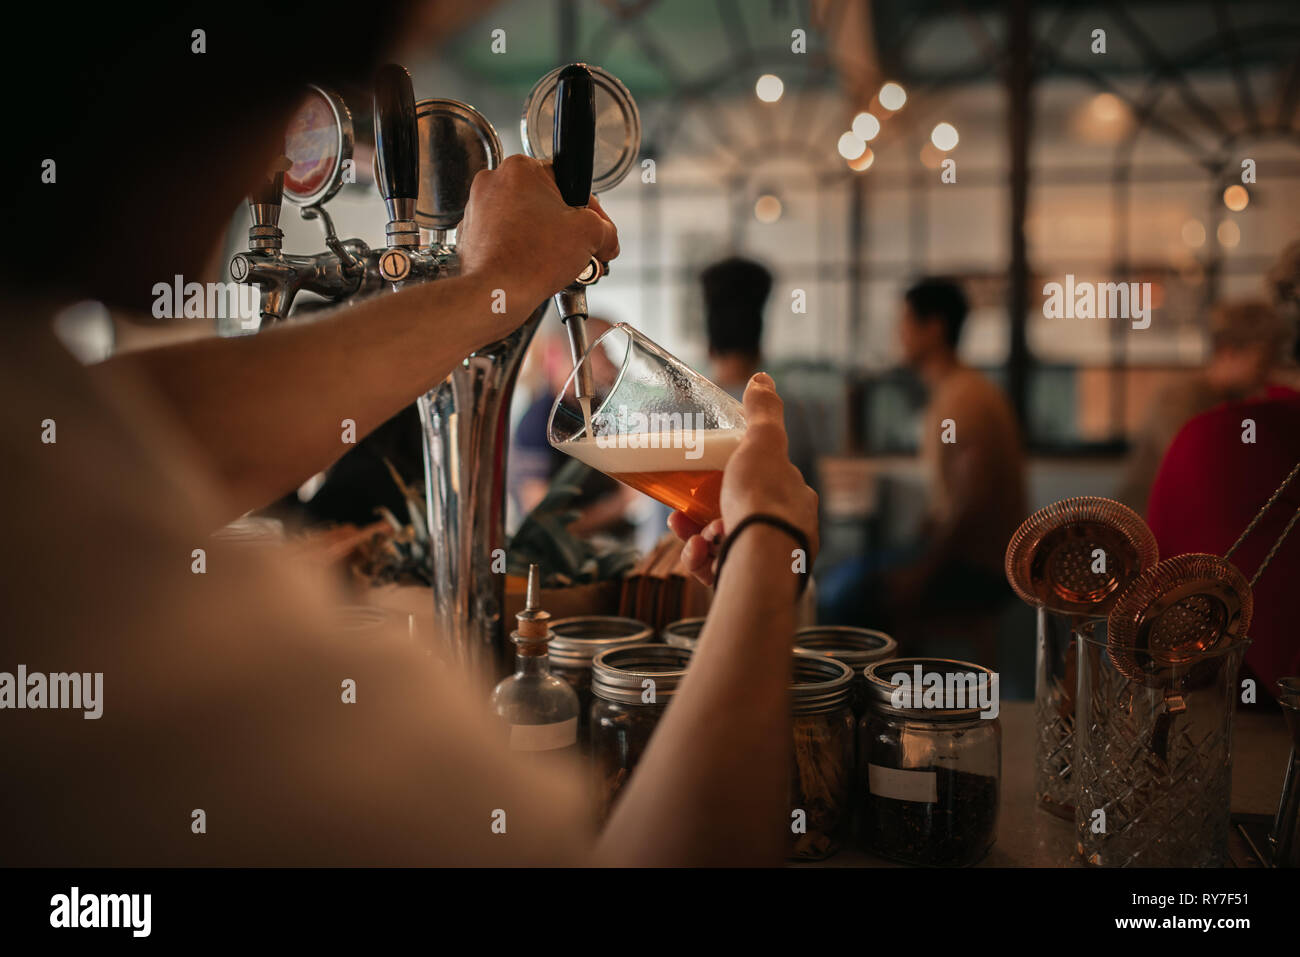 Bartender pouring beer behind a bar counter at night Stock Photo